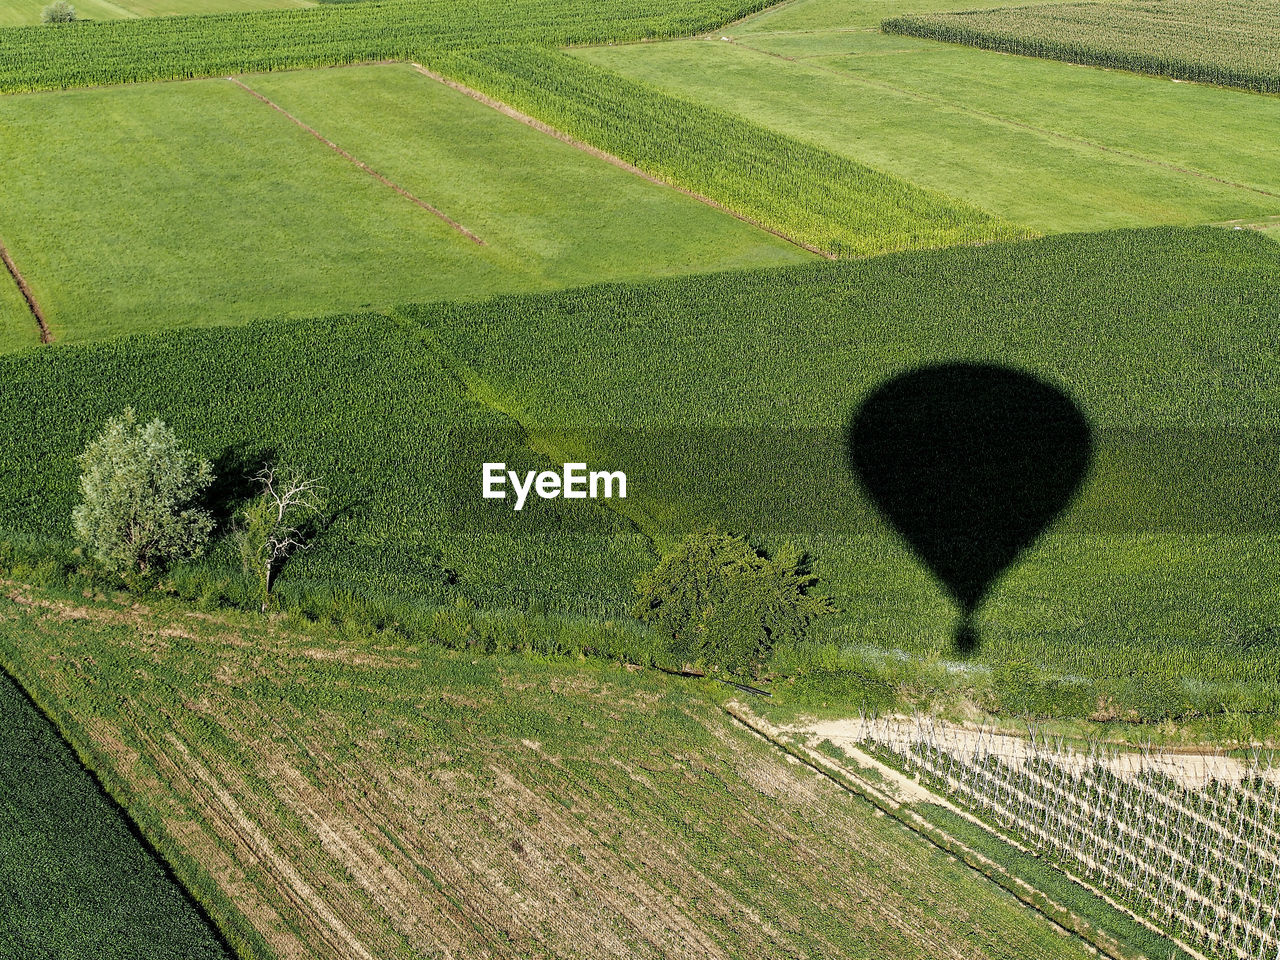 Shadow of hot air balloon on land